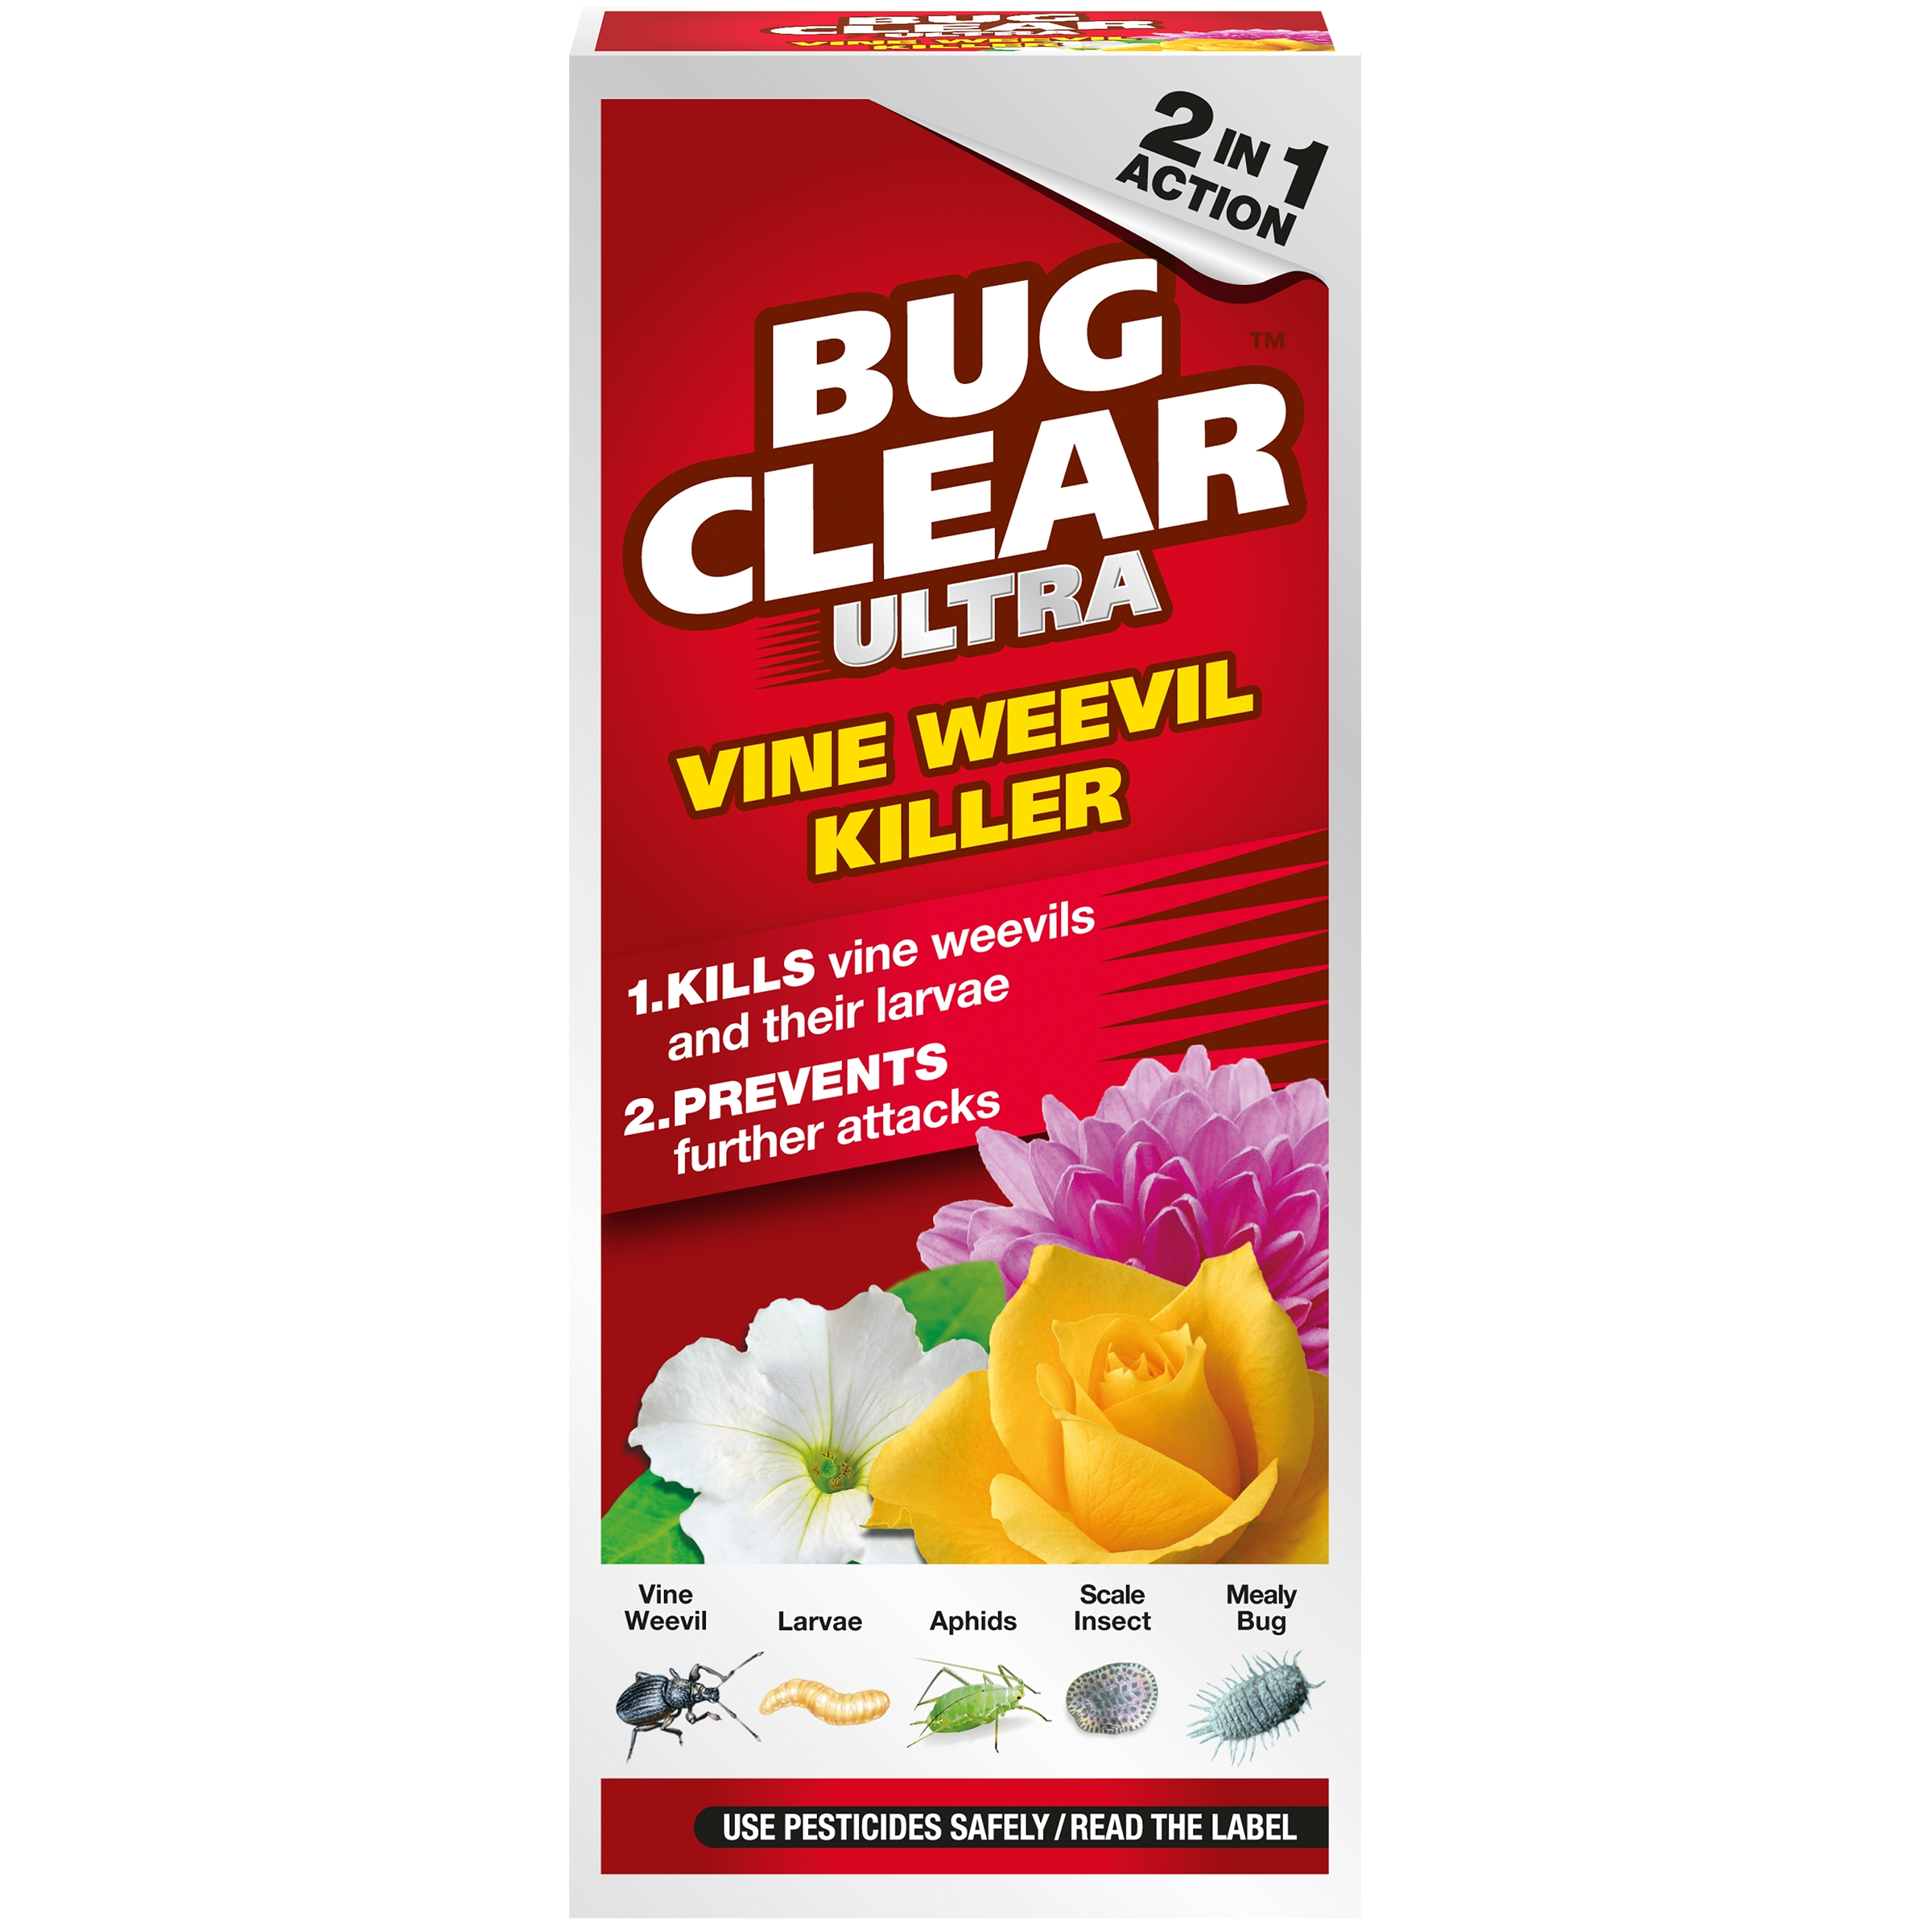 Bug Clear Ultra Vine Weevil Killer 2 in 1 Action 480ml Pest Control Concentrate